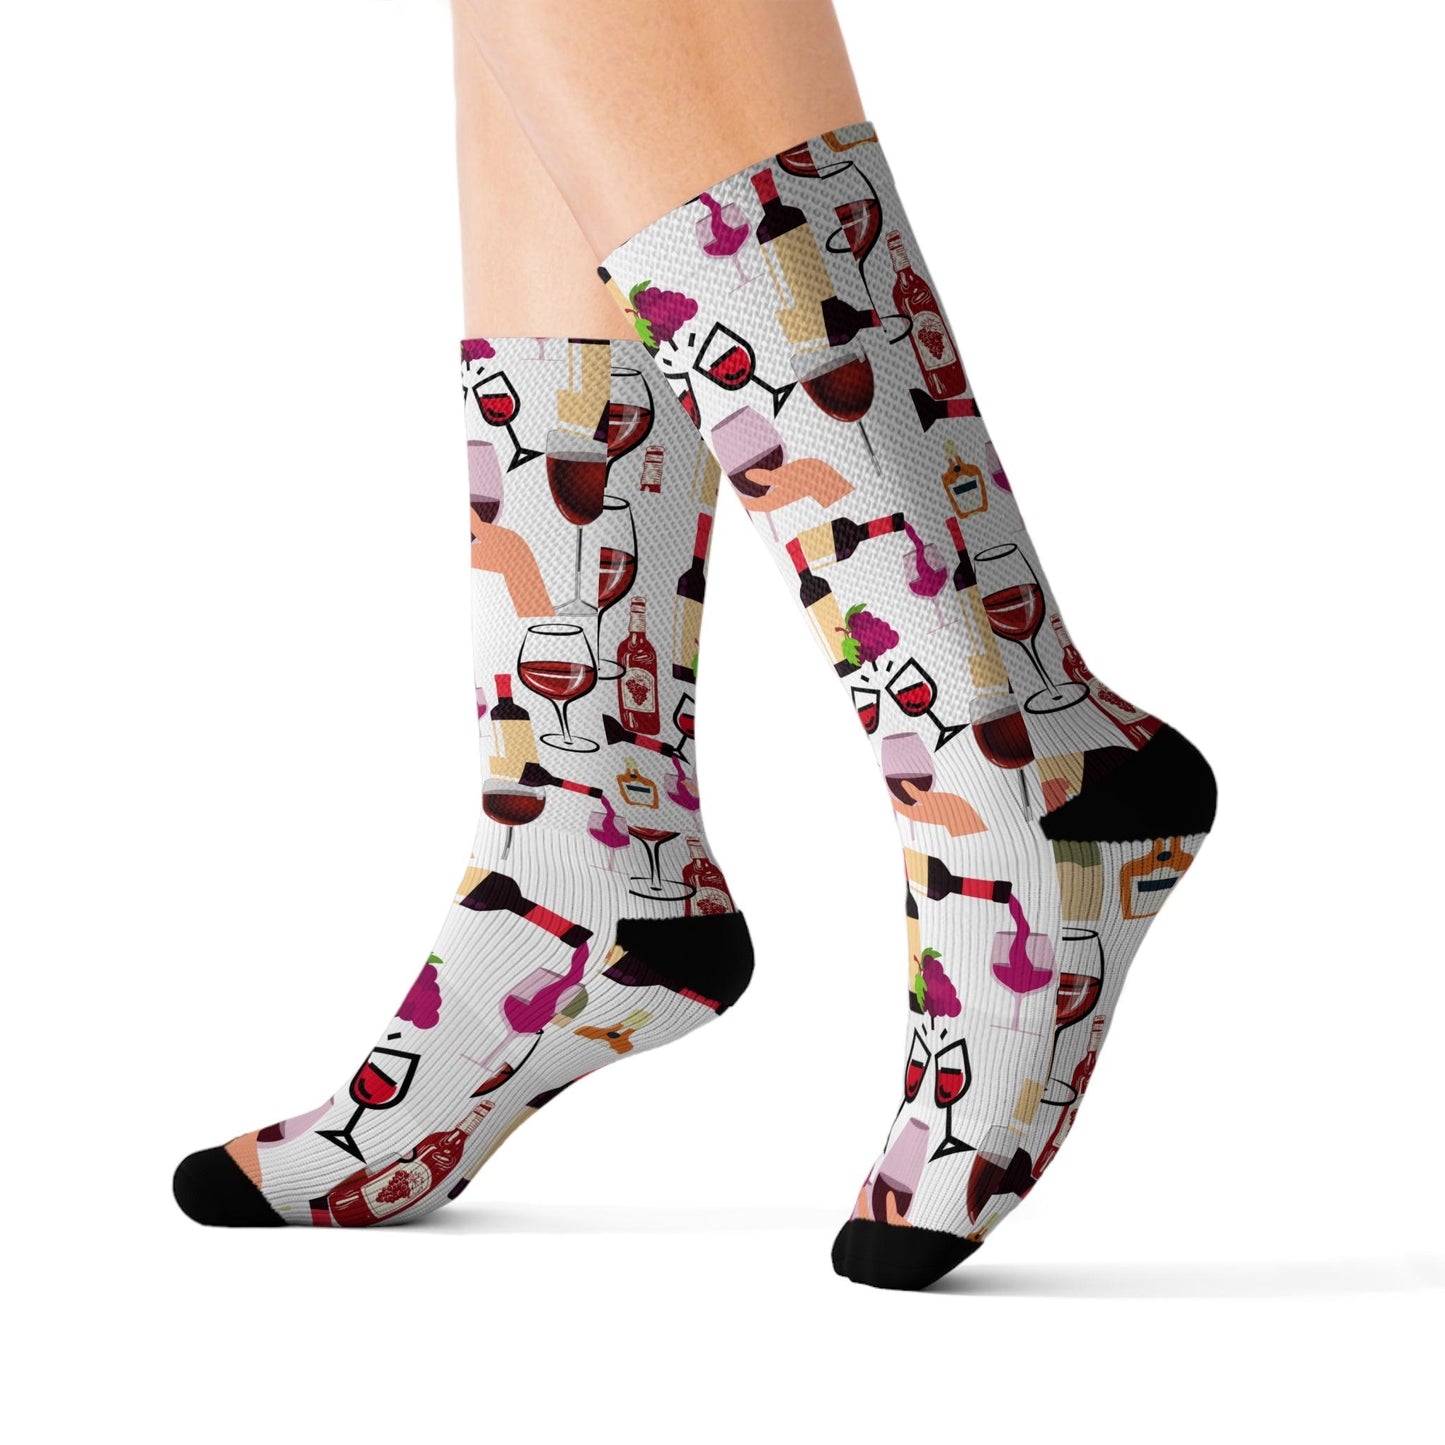 Red Wine Bottles and Wine Glass Socks